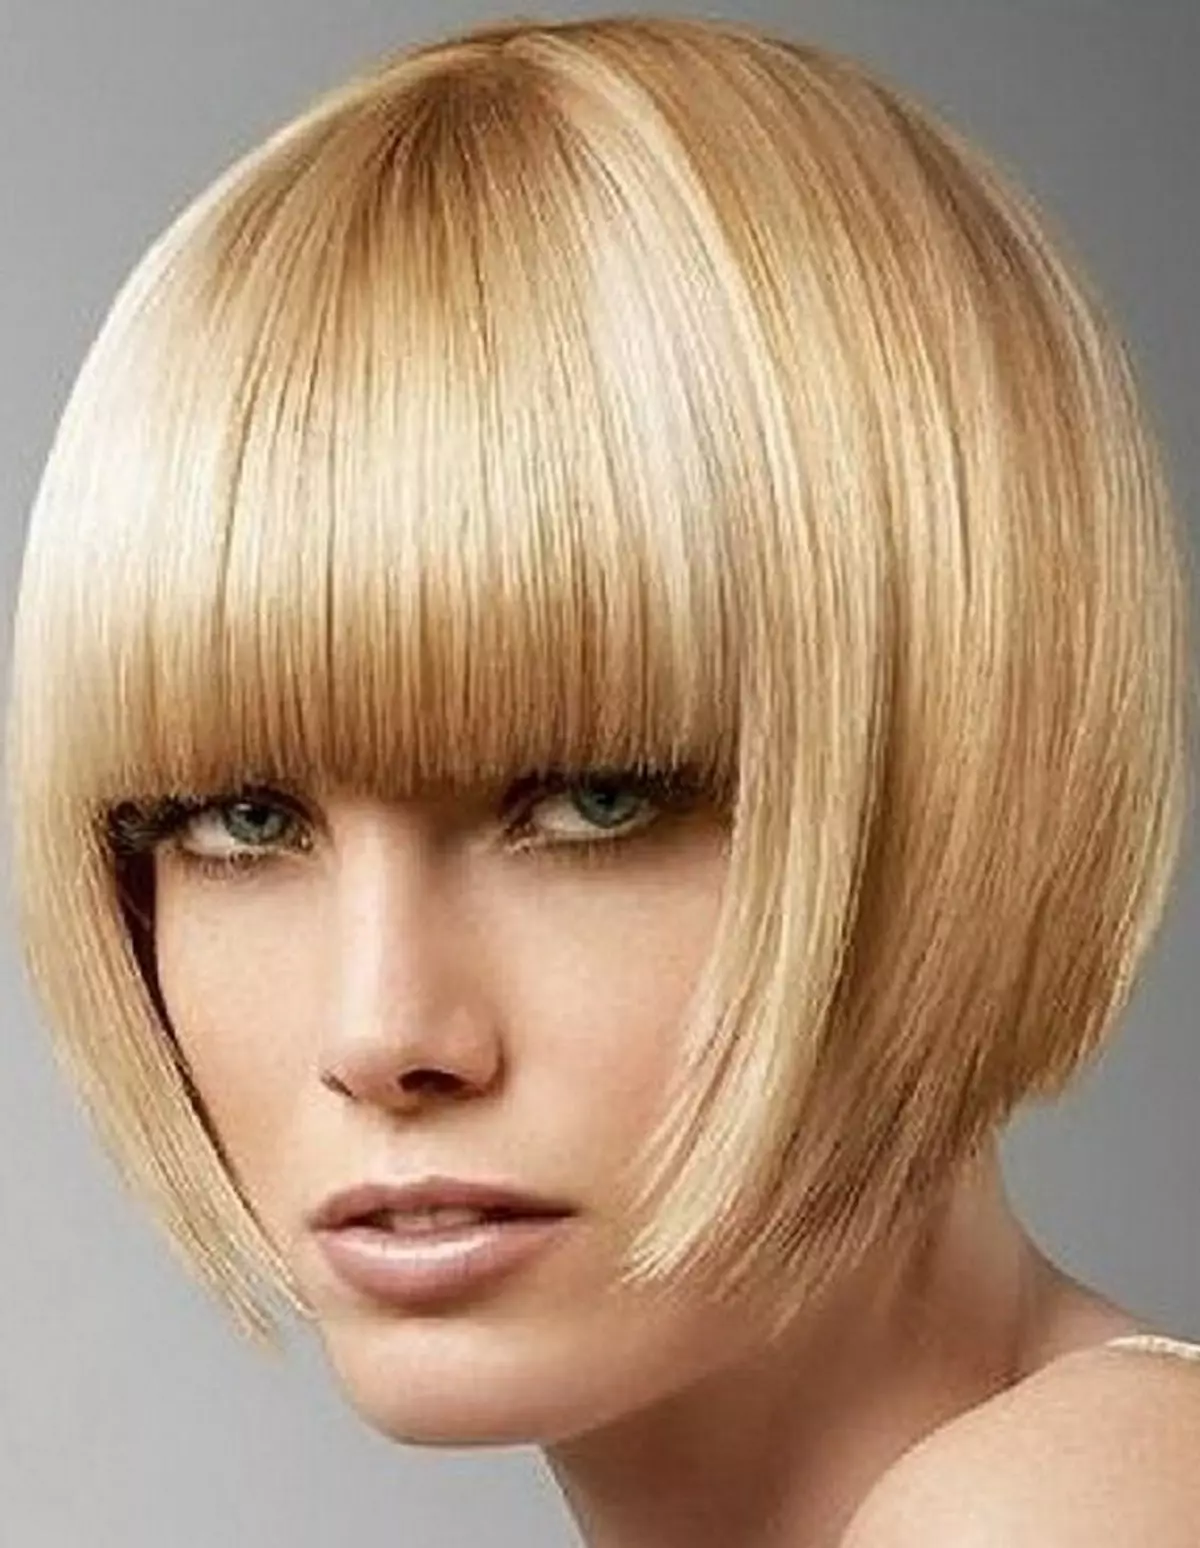 Graduated Bob Care (47 photos): Features Hairstyles. Who suits a short haircut? How to choose a bang? 16863_33